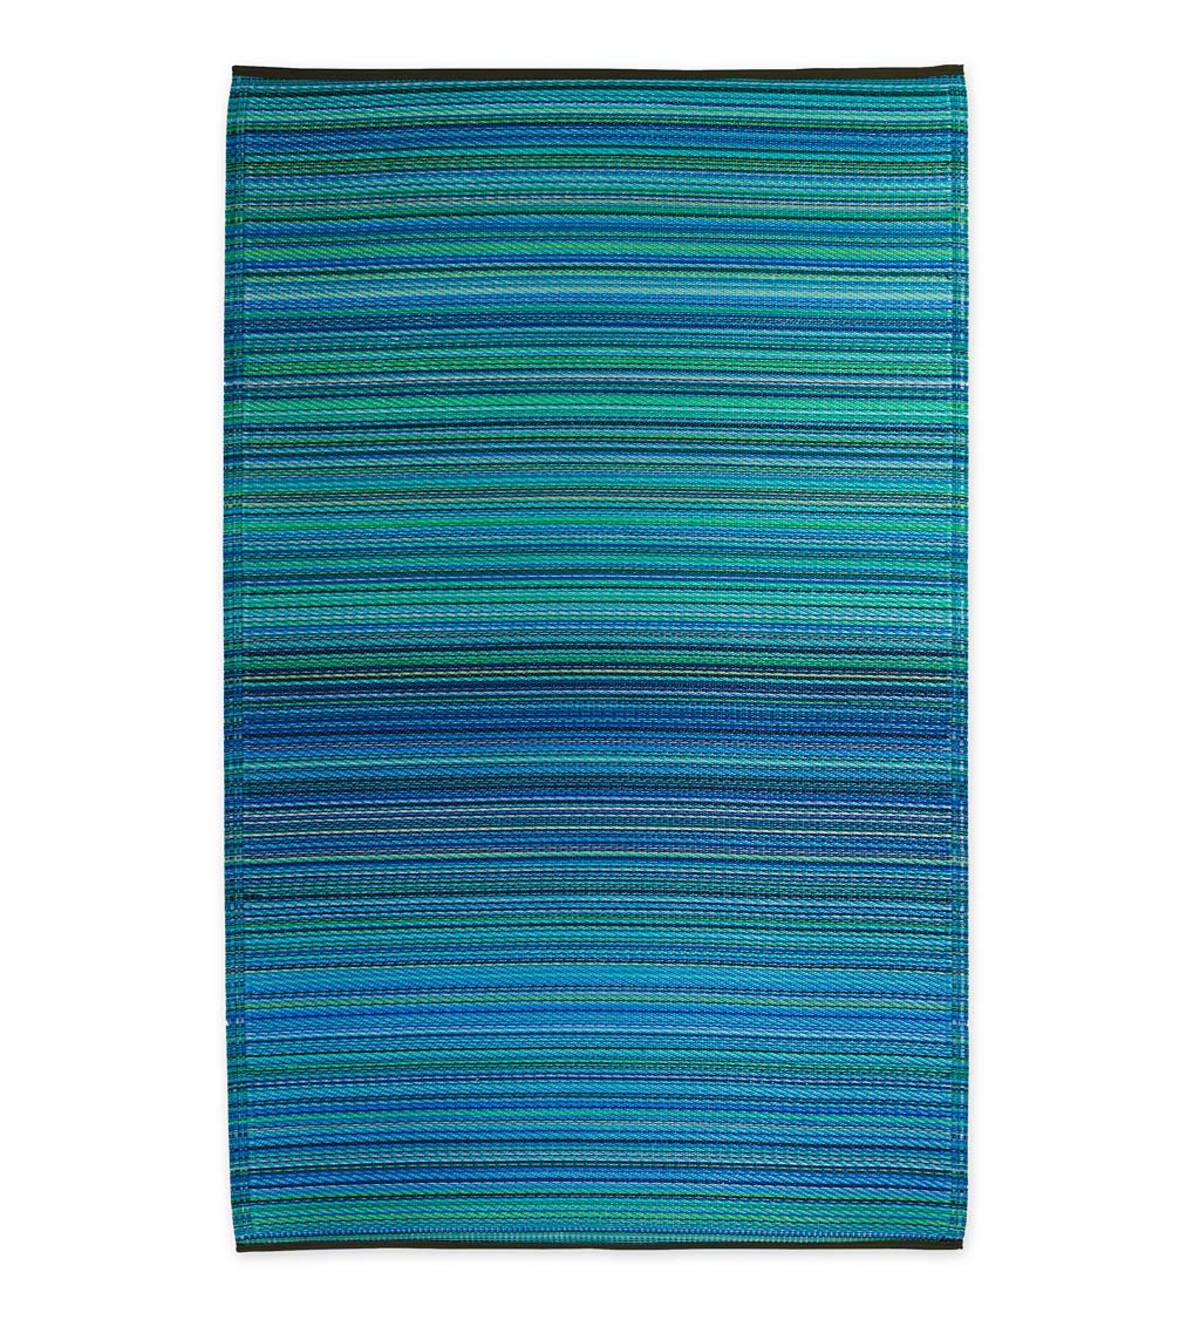 Reversible&Recycled Indoor/Outdoor Rug Cancun Style - 8x10 - Turquoise